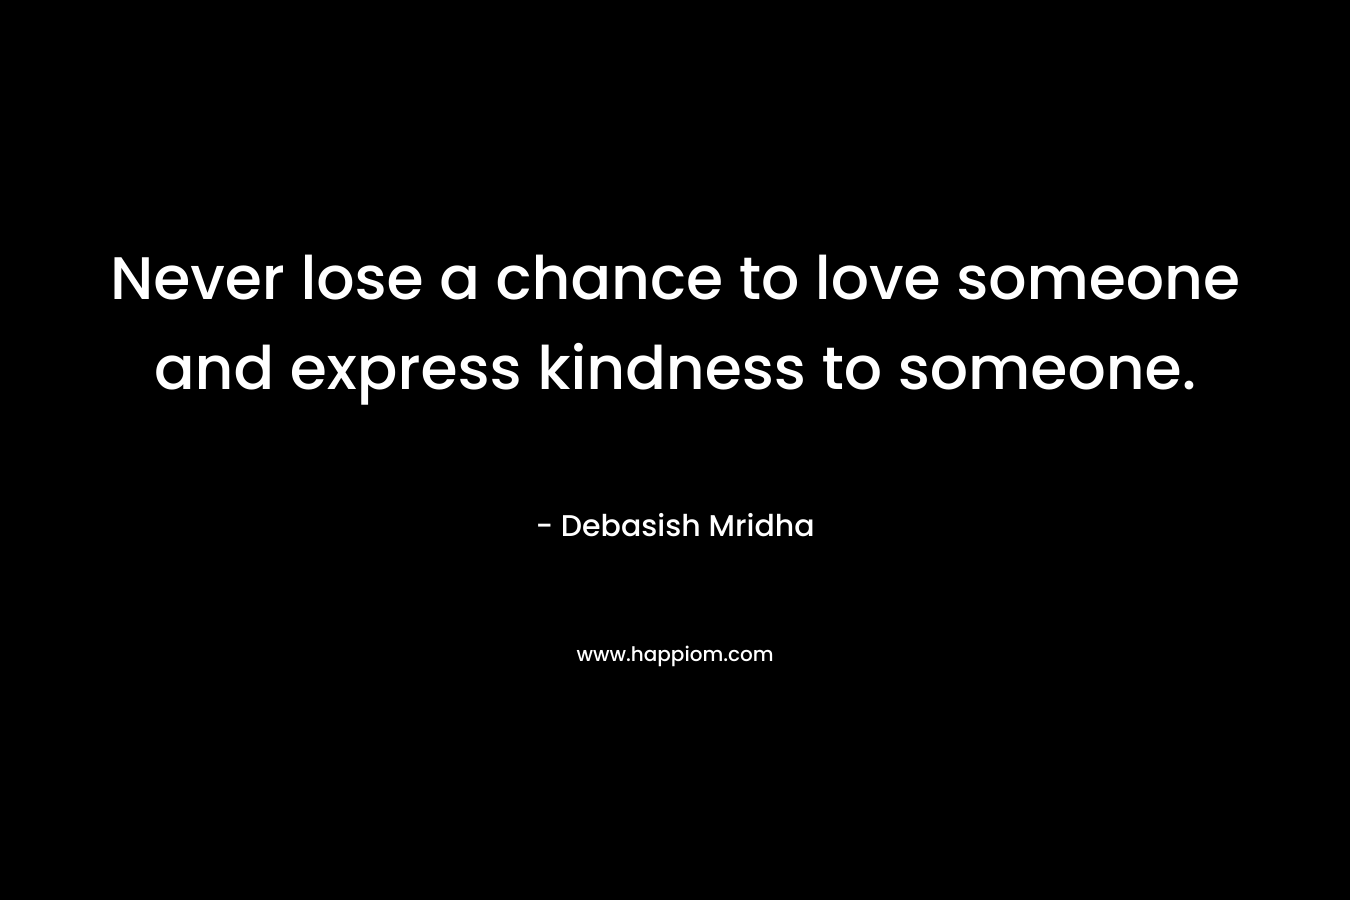 Never lose a chance to love someone and express kindness to someone.